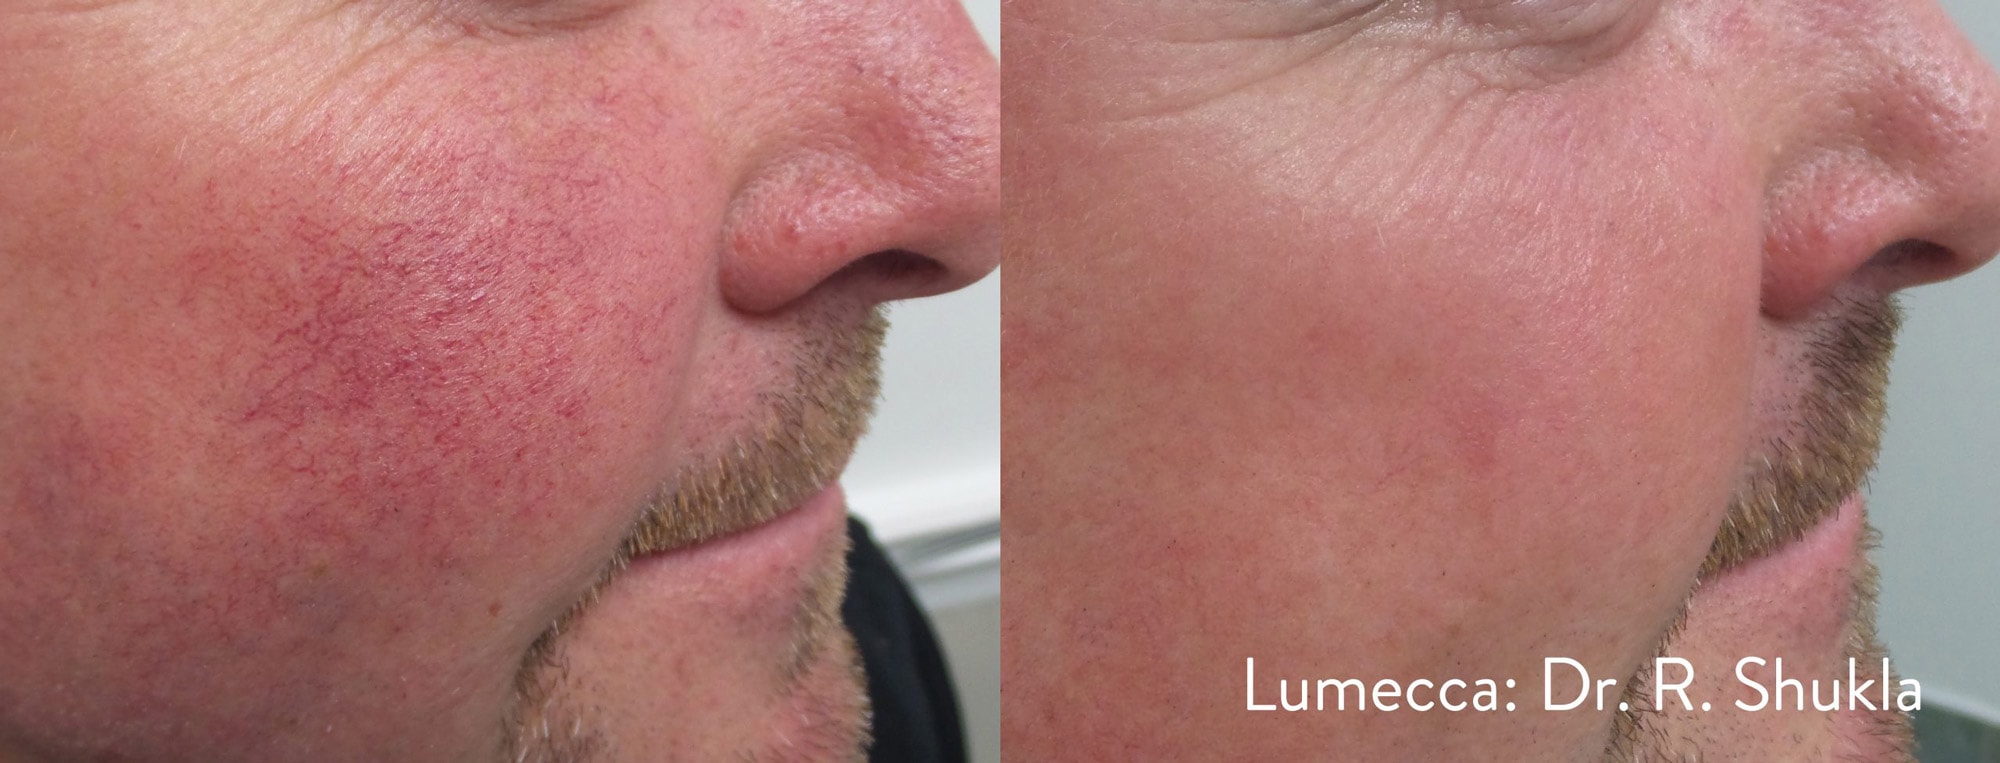 Before and After photos showing Lumecca treatments eliminating broken blood vessels on a man’s cheeks for a clear complexion